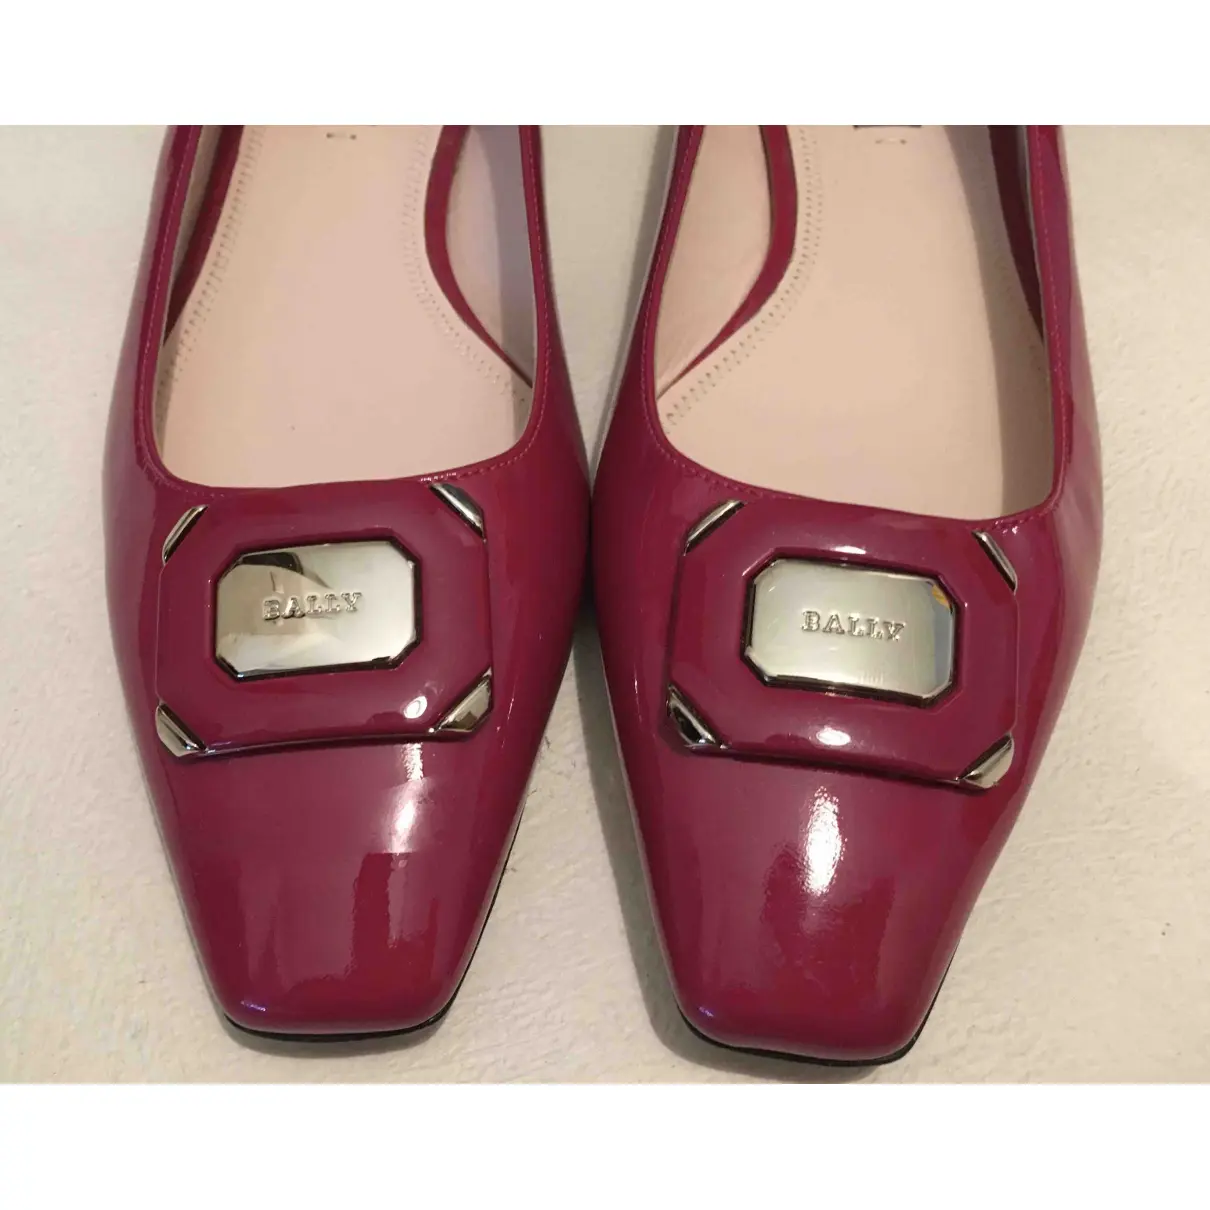 Patent leather ballet flats Bally